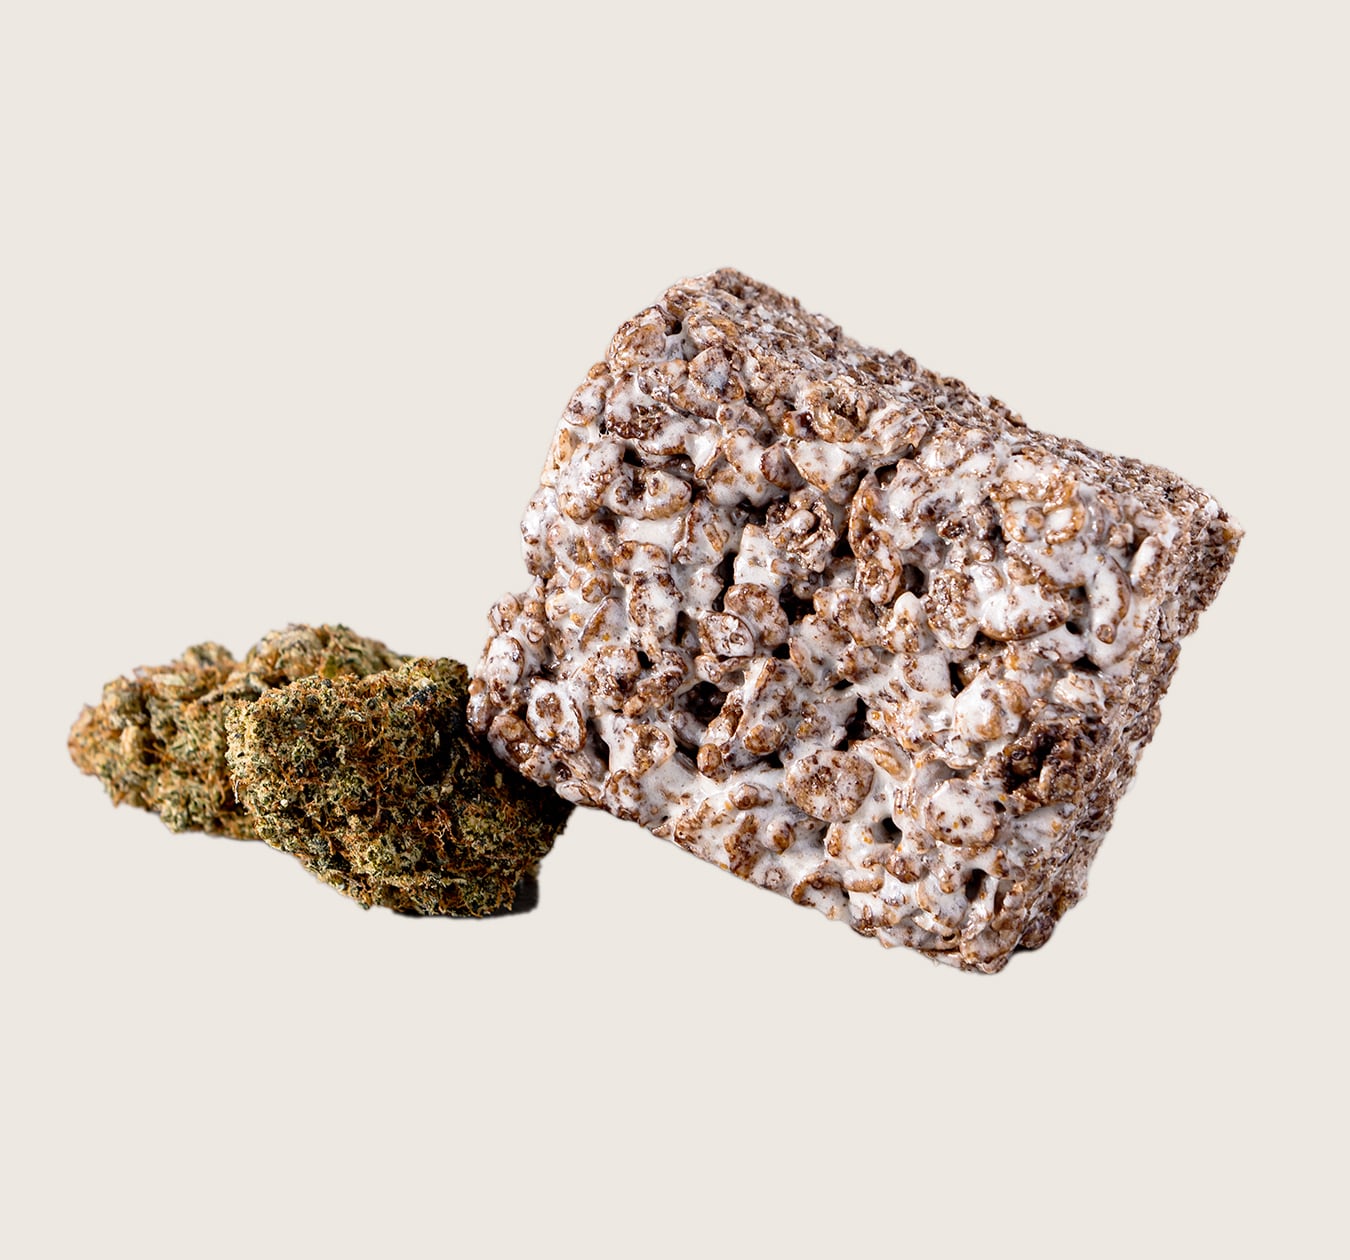 Andy’s THC Chocolate Crunch